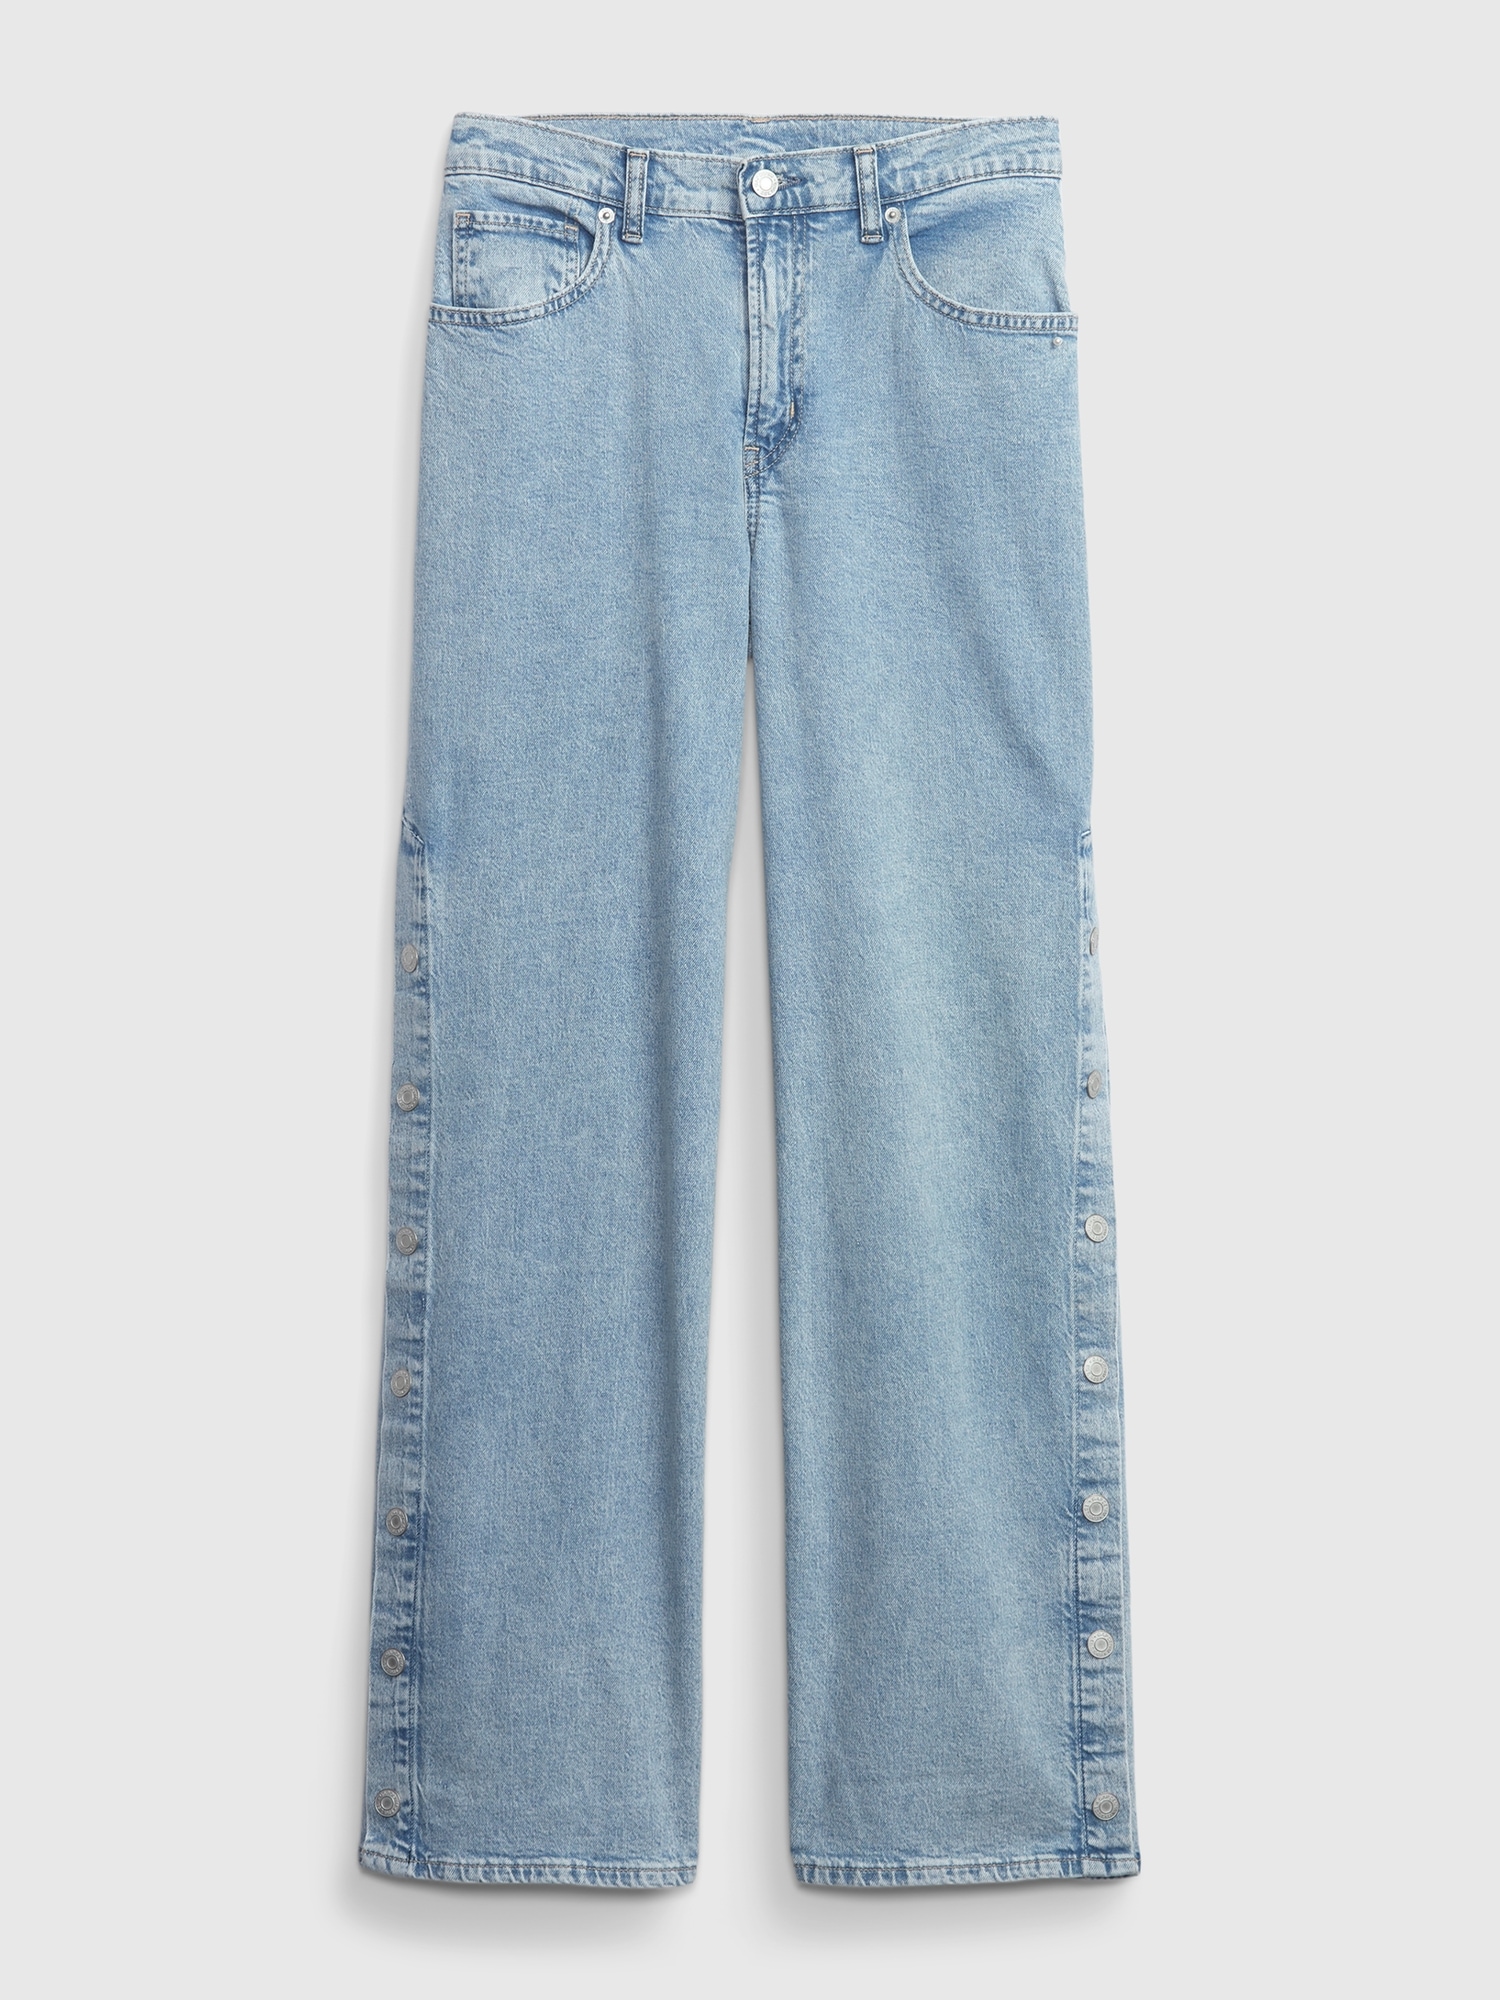 PROJECT GAP Low Rise Snap Side Baggy Jeans with Washwell | Gap